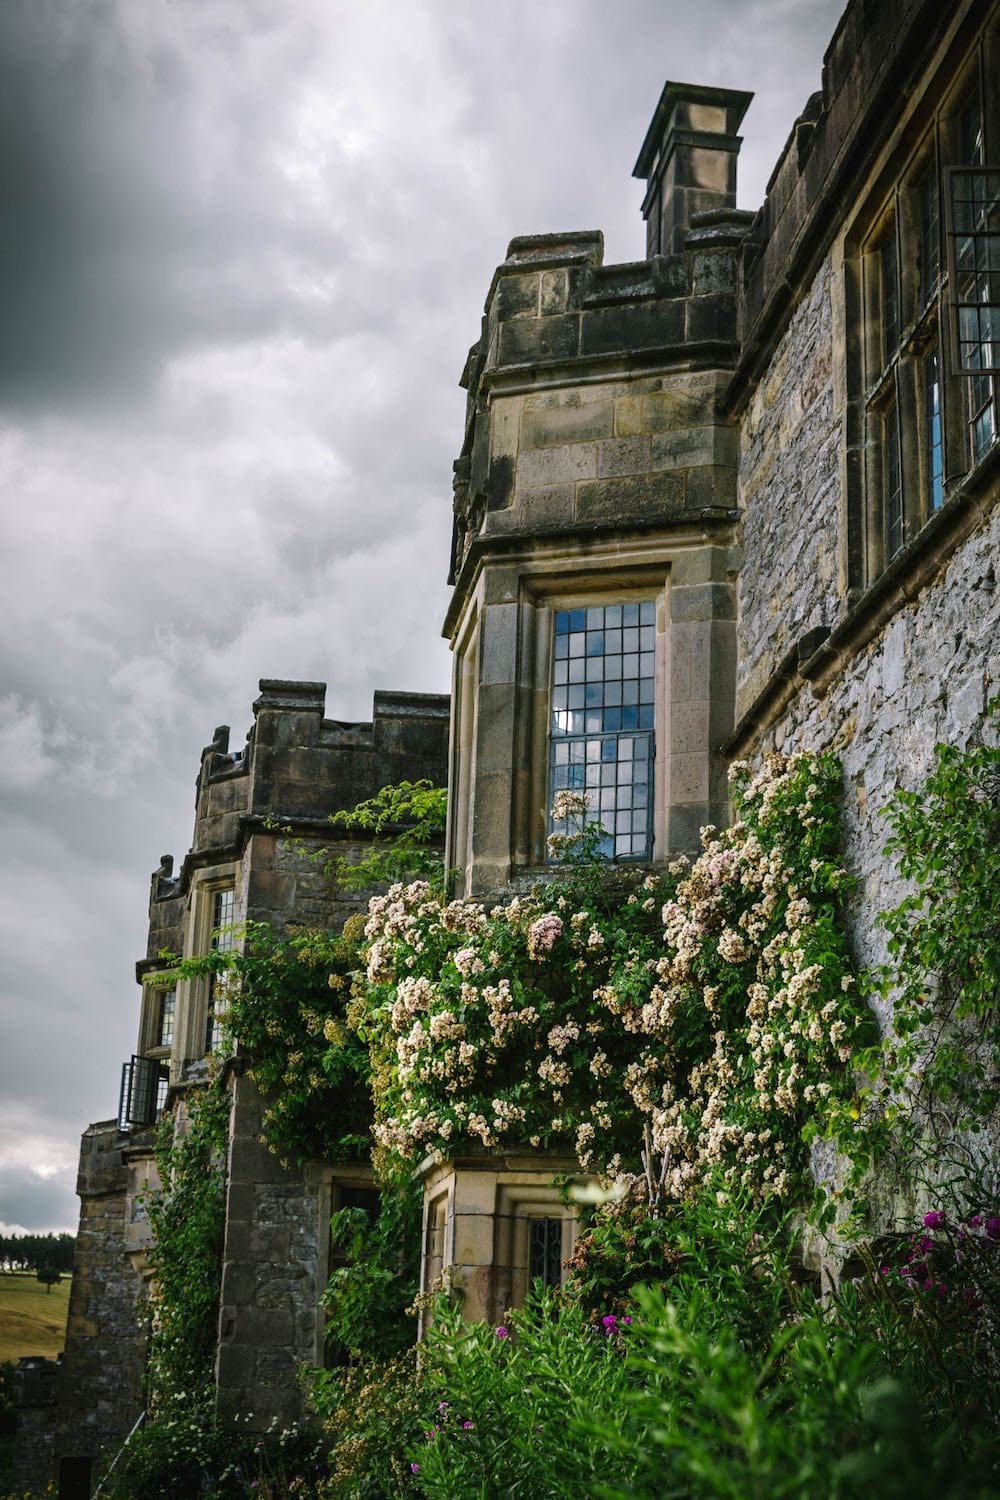 A grand buttressed English mansion with climbing roses